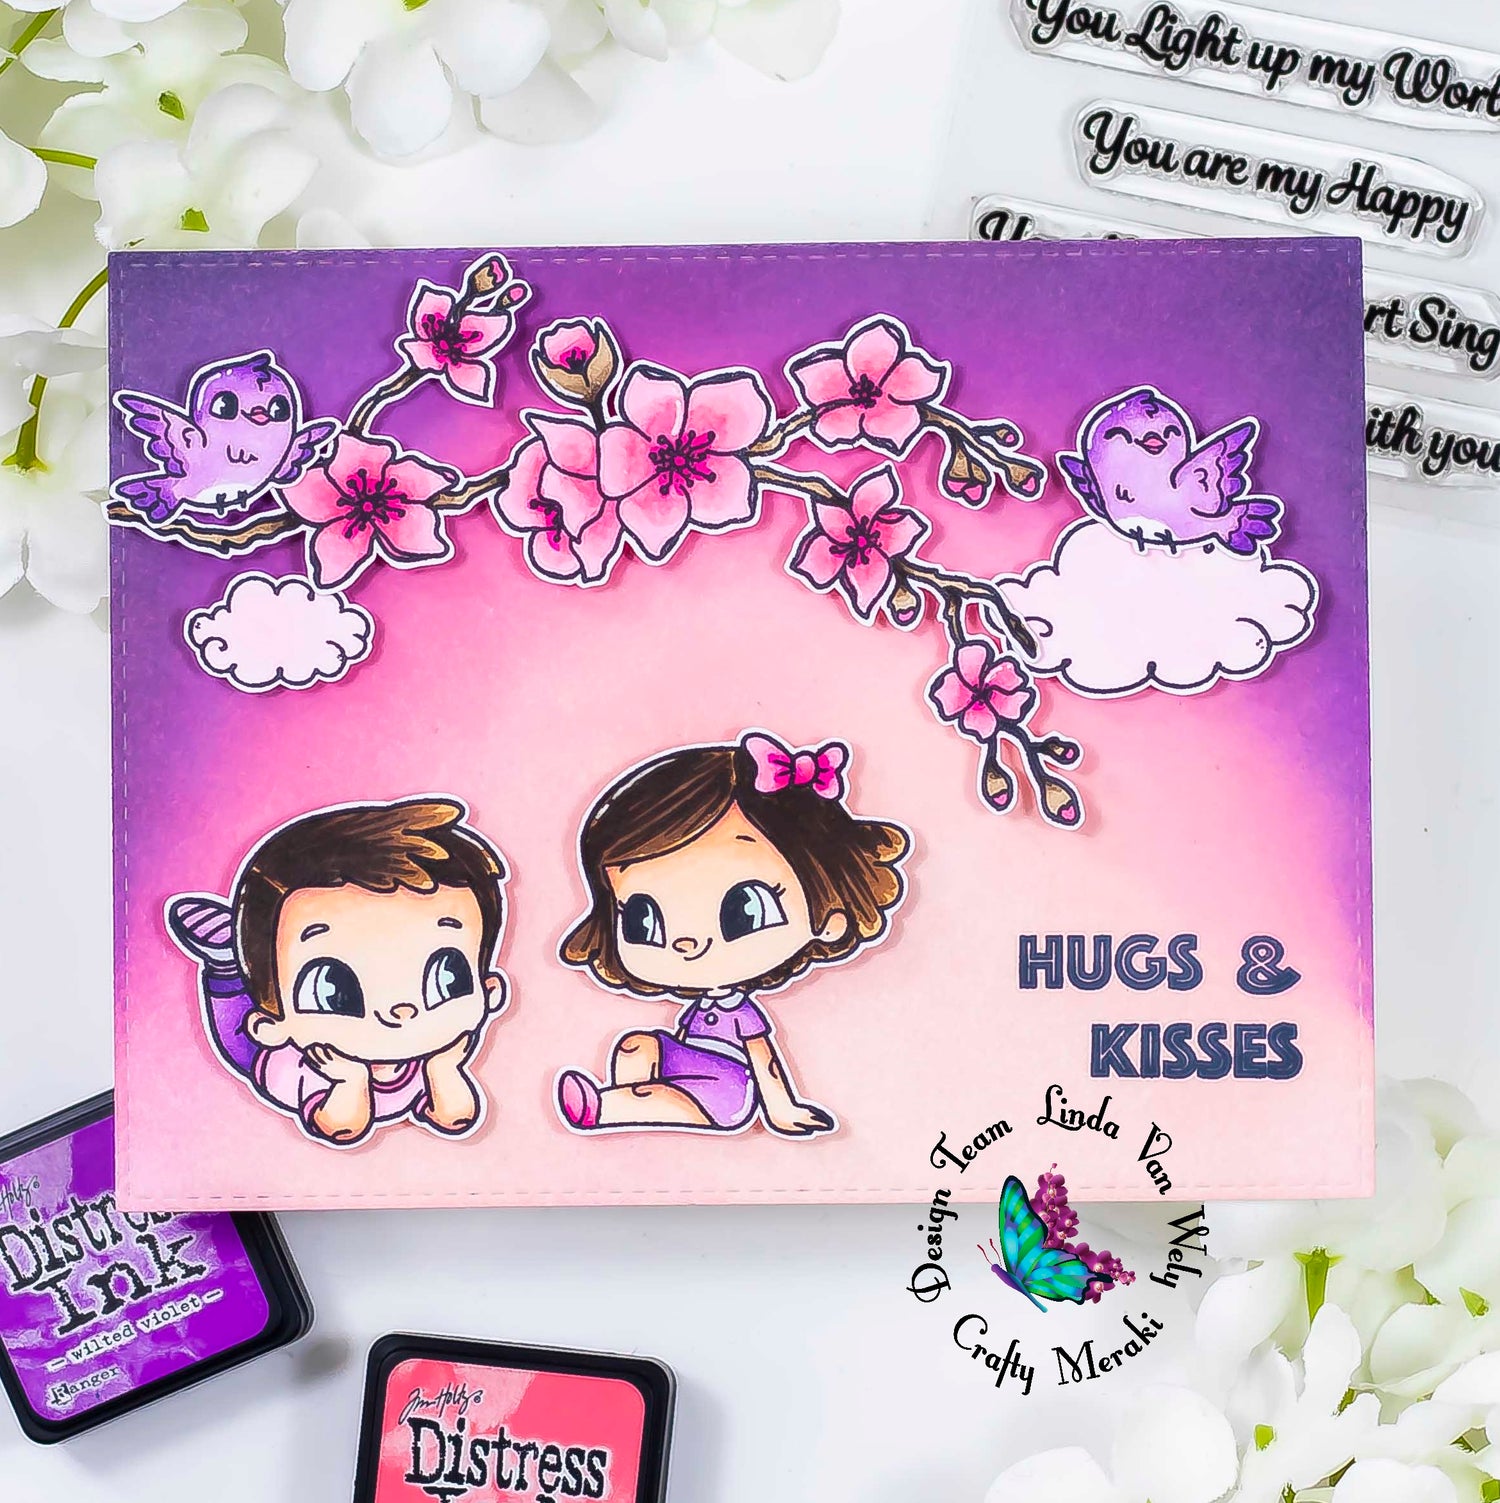 Hugs and kisses - love themed card by Linda